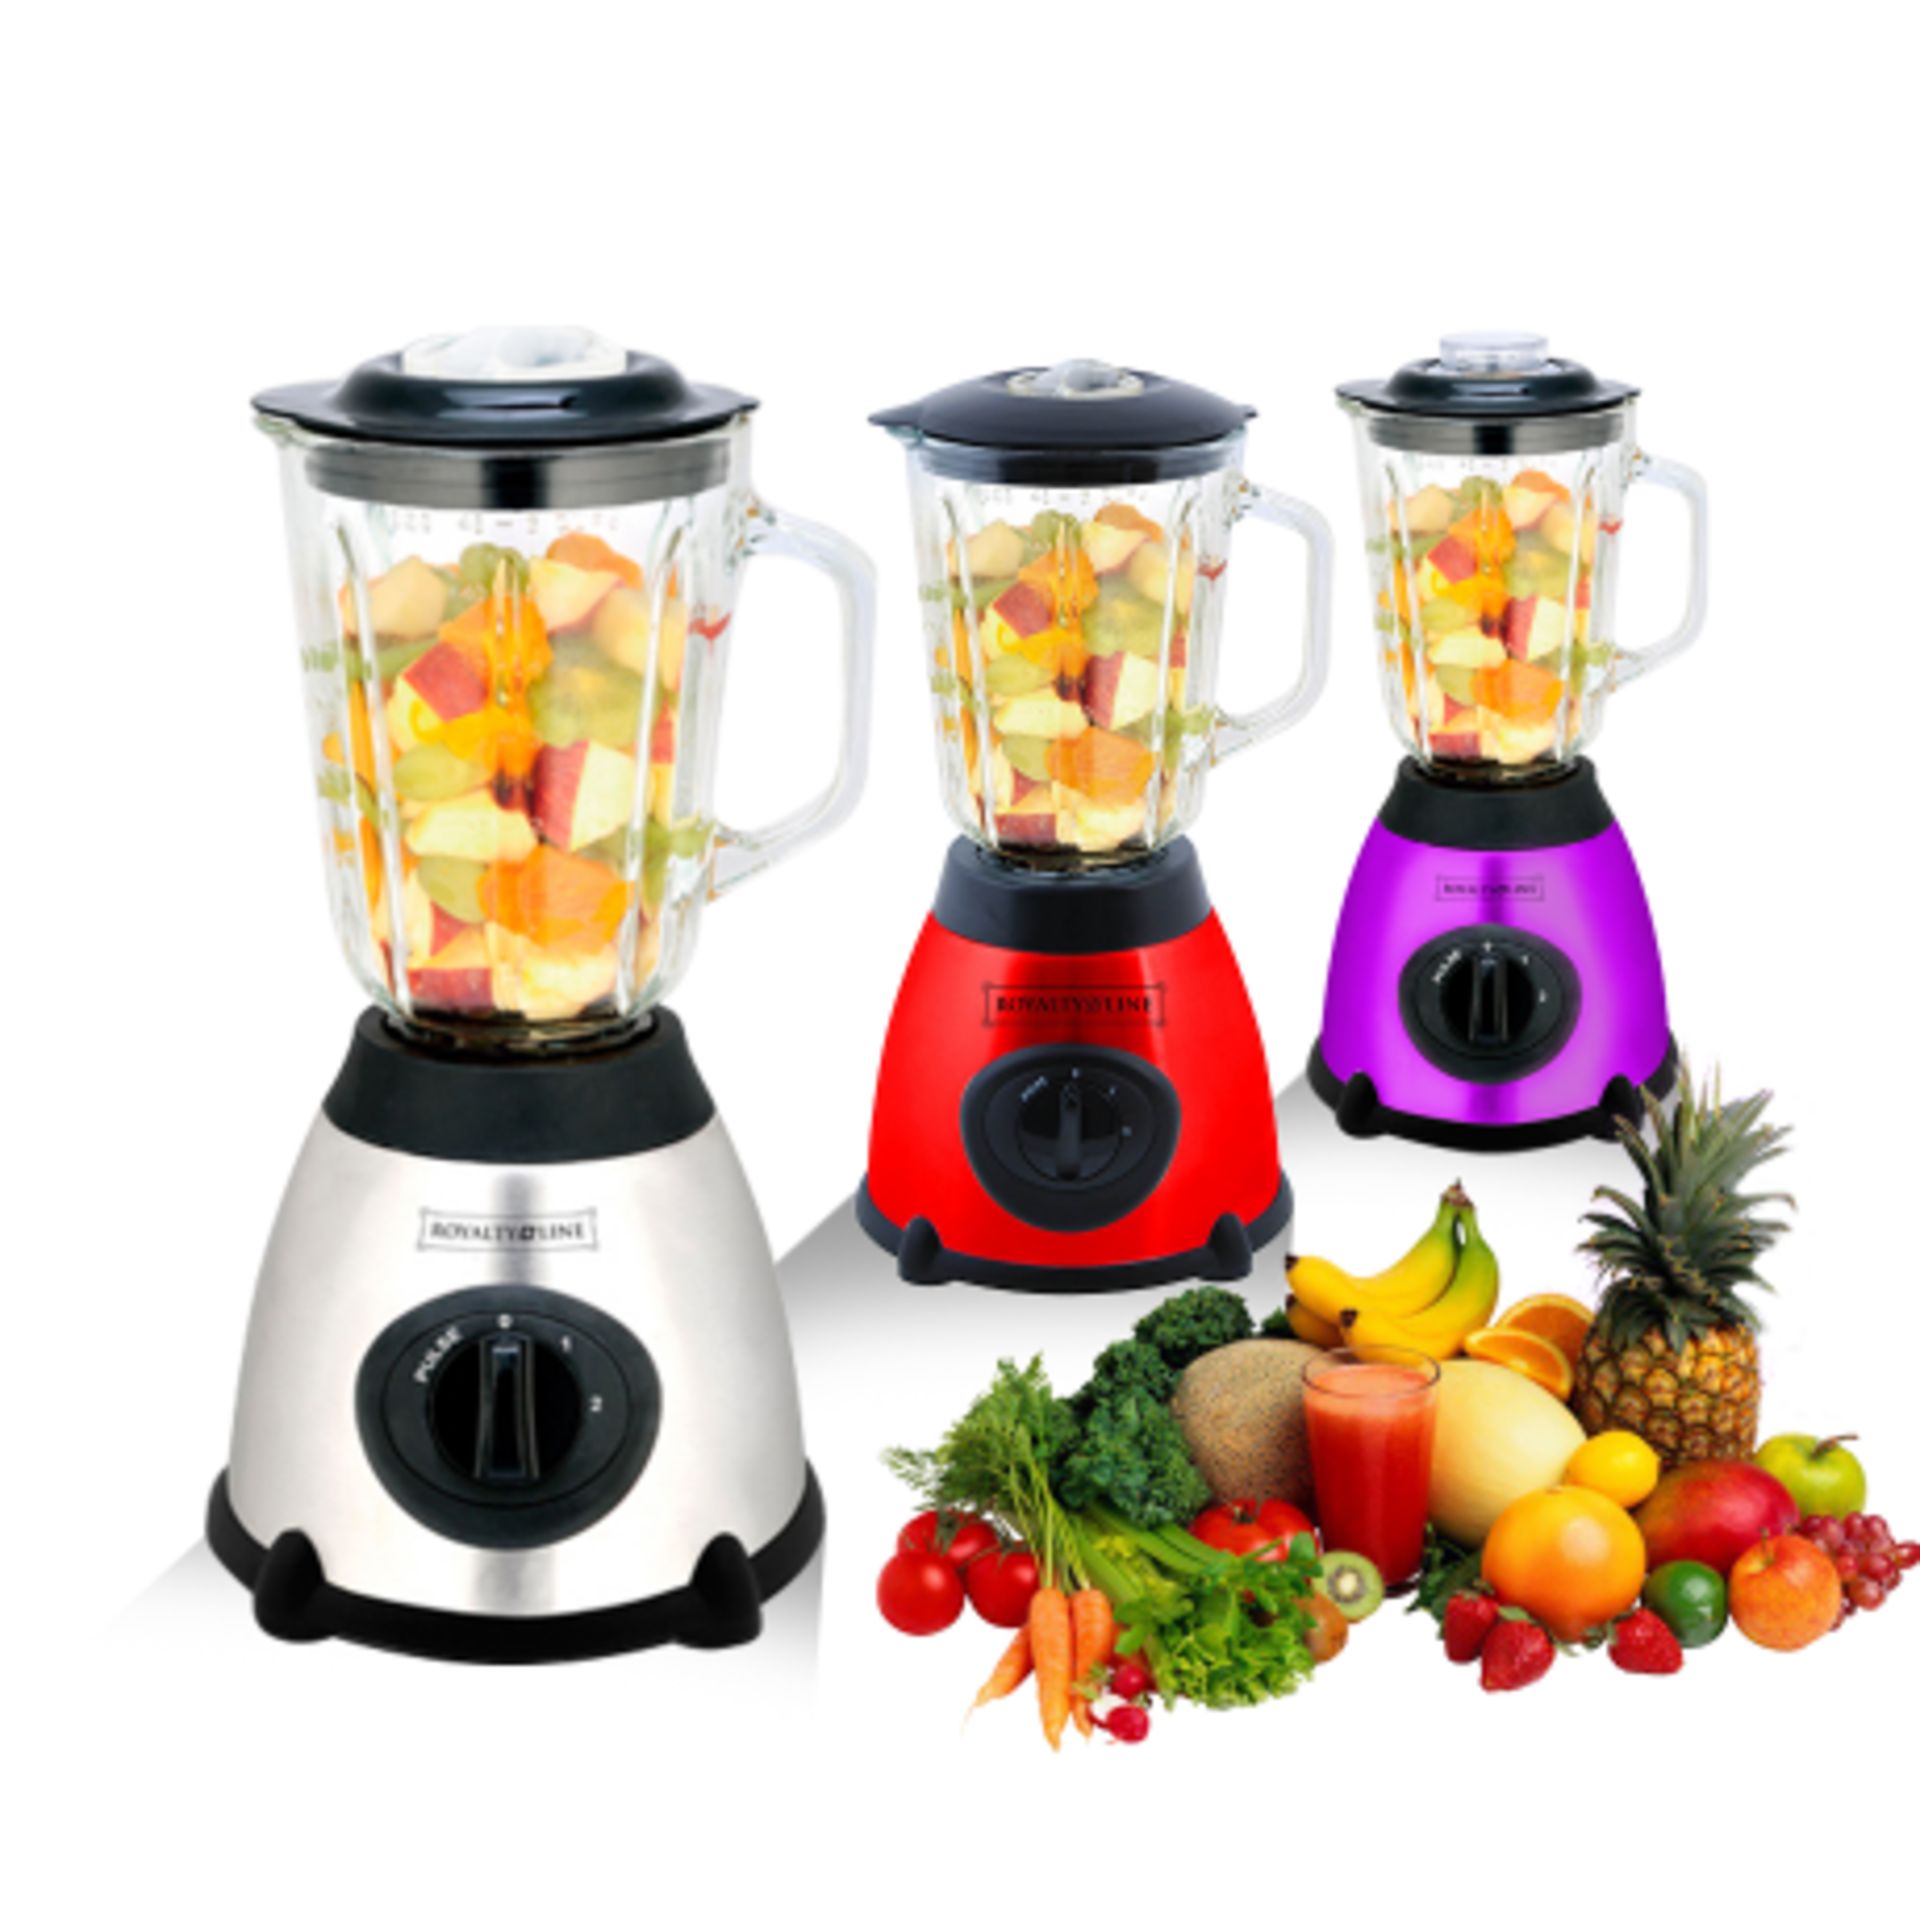 V Grade A Blender/Mixer 1.5L - Stainless Steel Blades - Two Speed & Pulse Control - Stainless